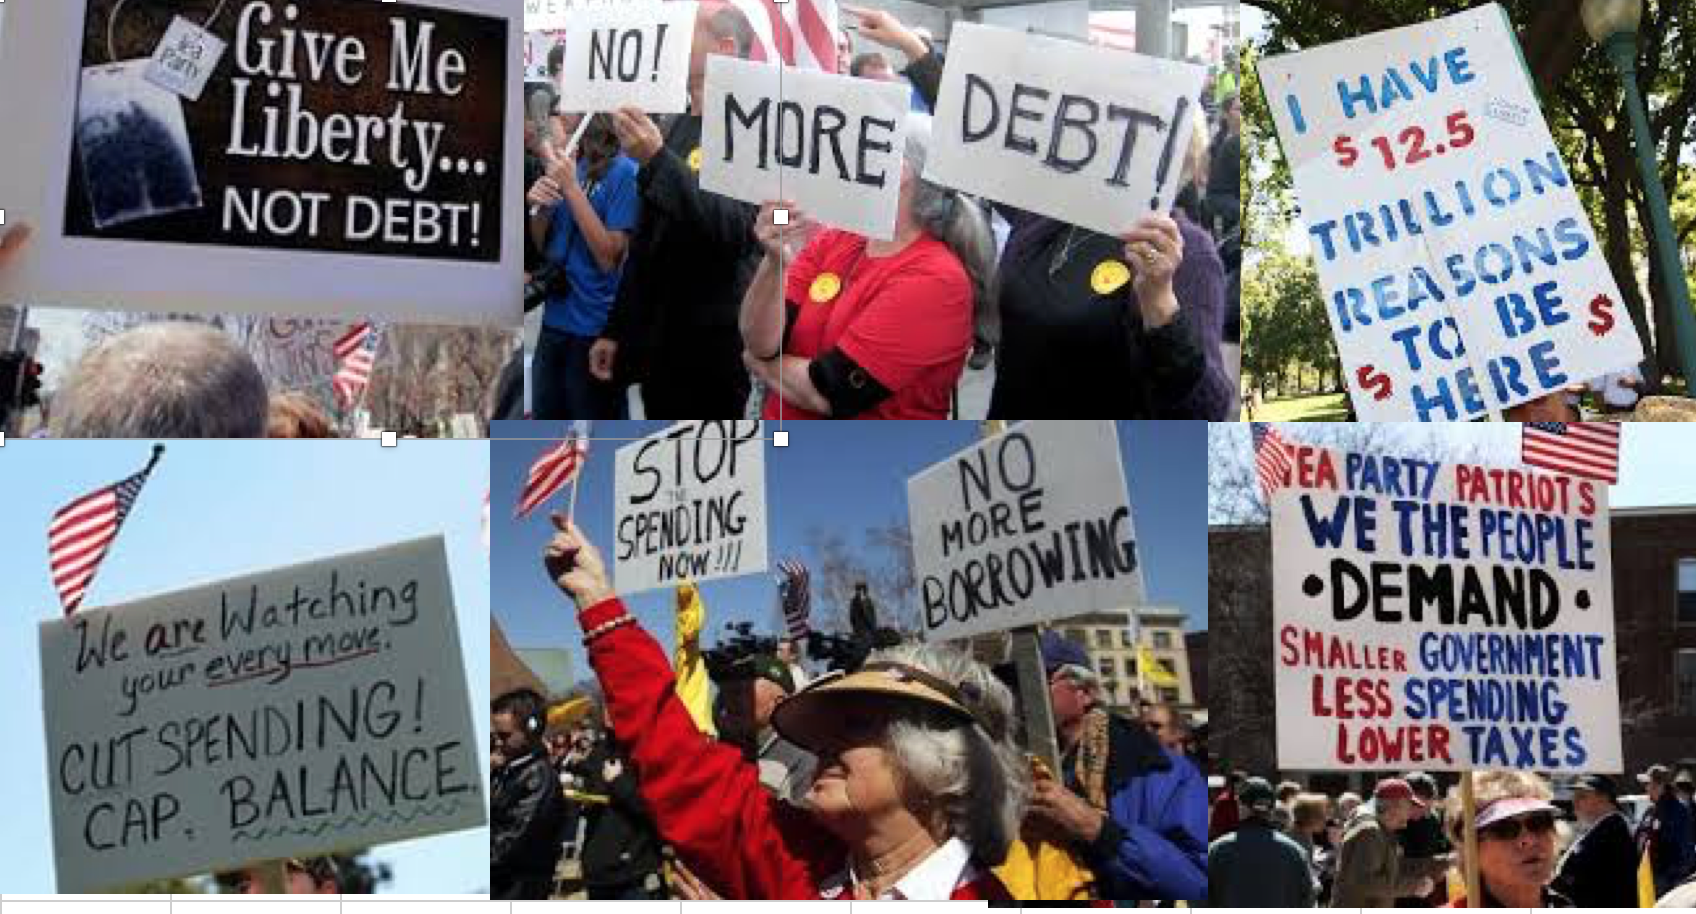 protest - Give Me Liberty... Noi R More Debtuvas Not Debt! Have $12.5 Trillion Reasons To Be Here Stop No Sanding More Borrowing Sea Party Patriots We The People Demand Smaller Government Less Spending Lower Taxes We are Watching your every more. Cut Spen